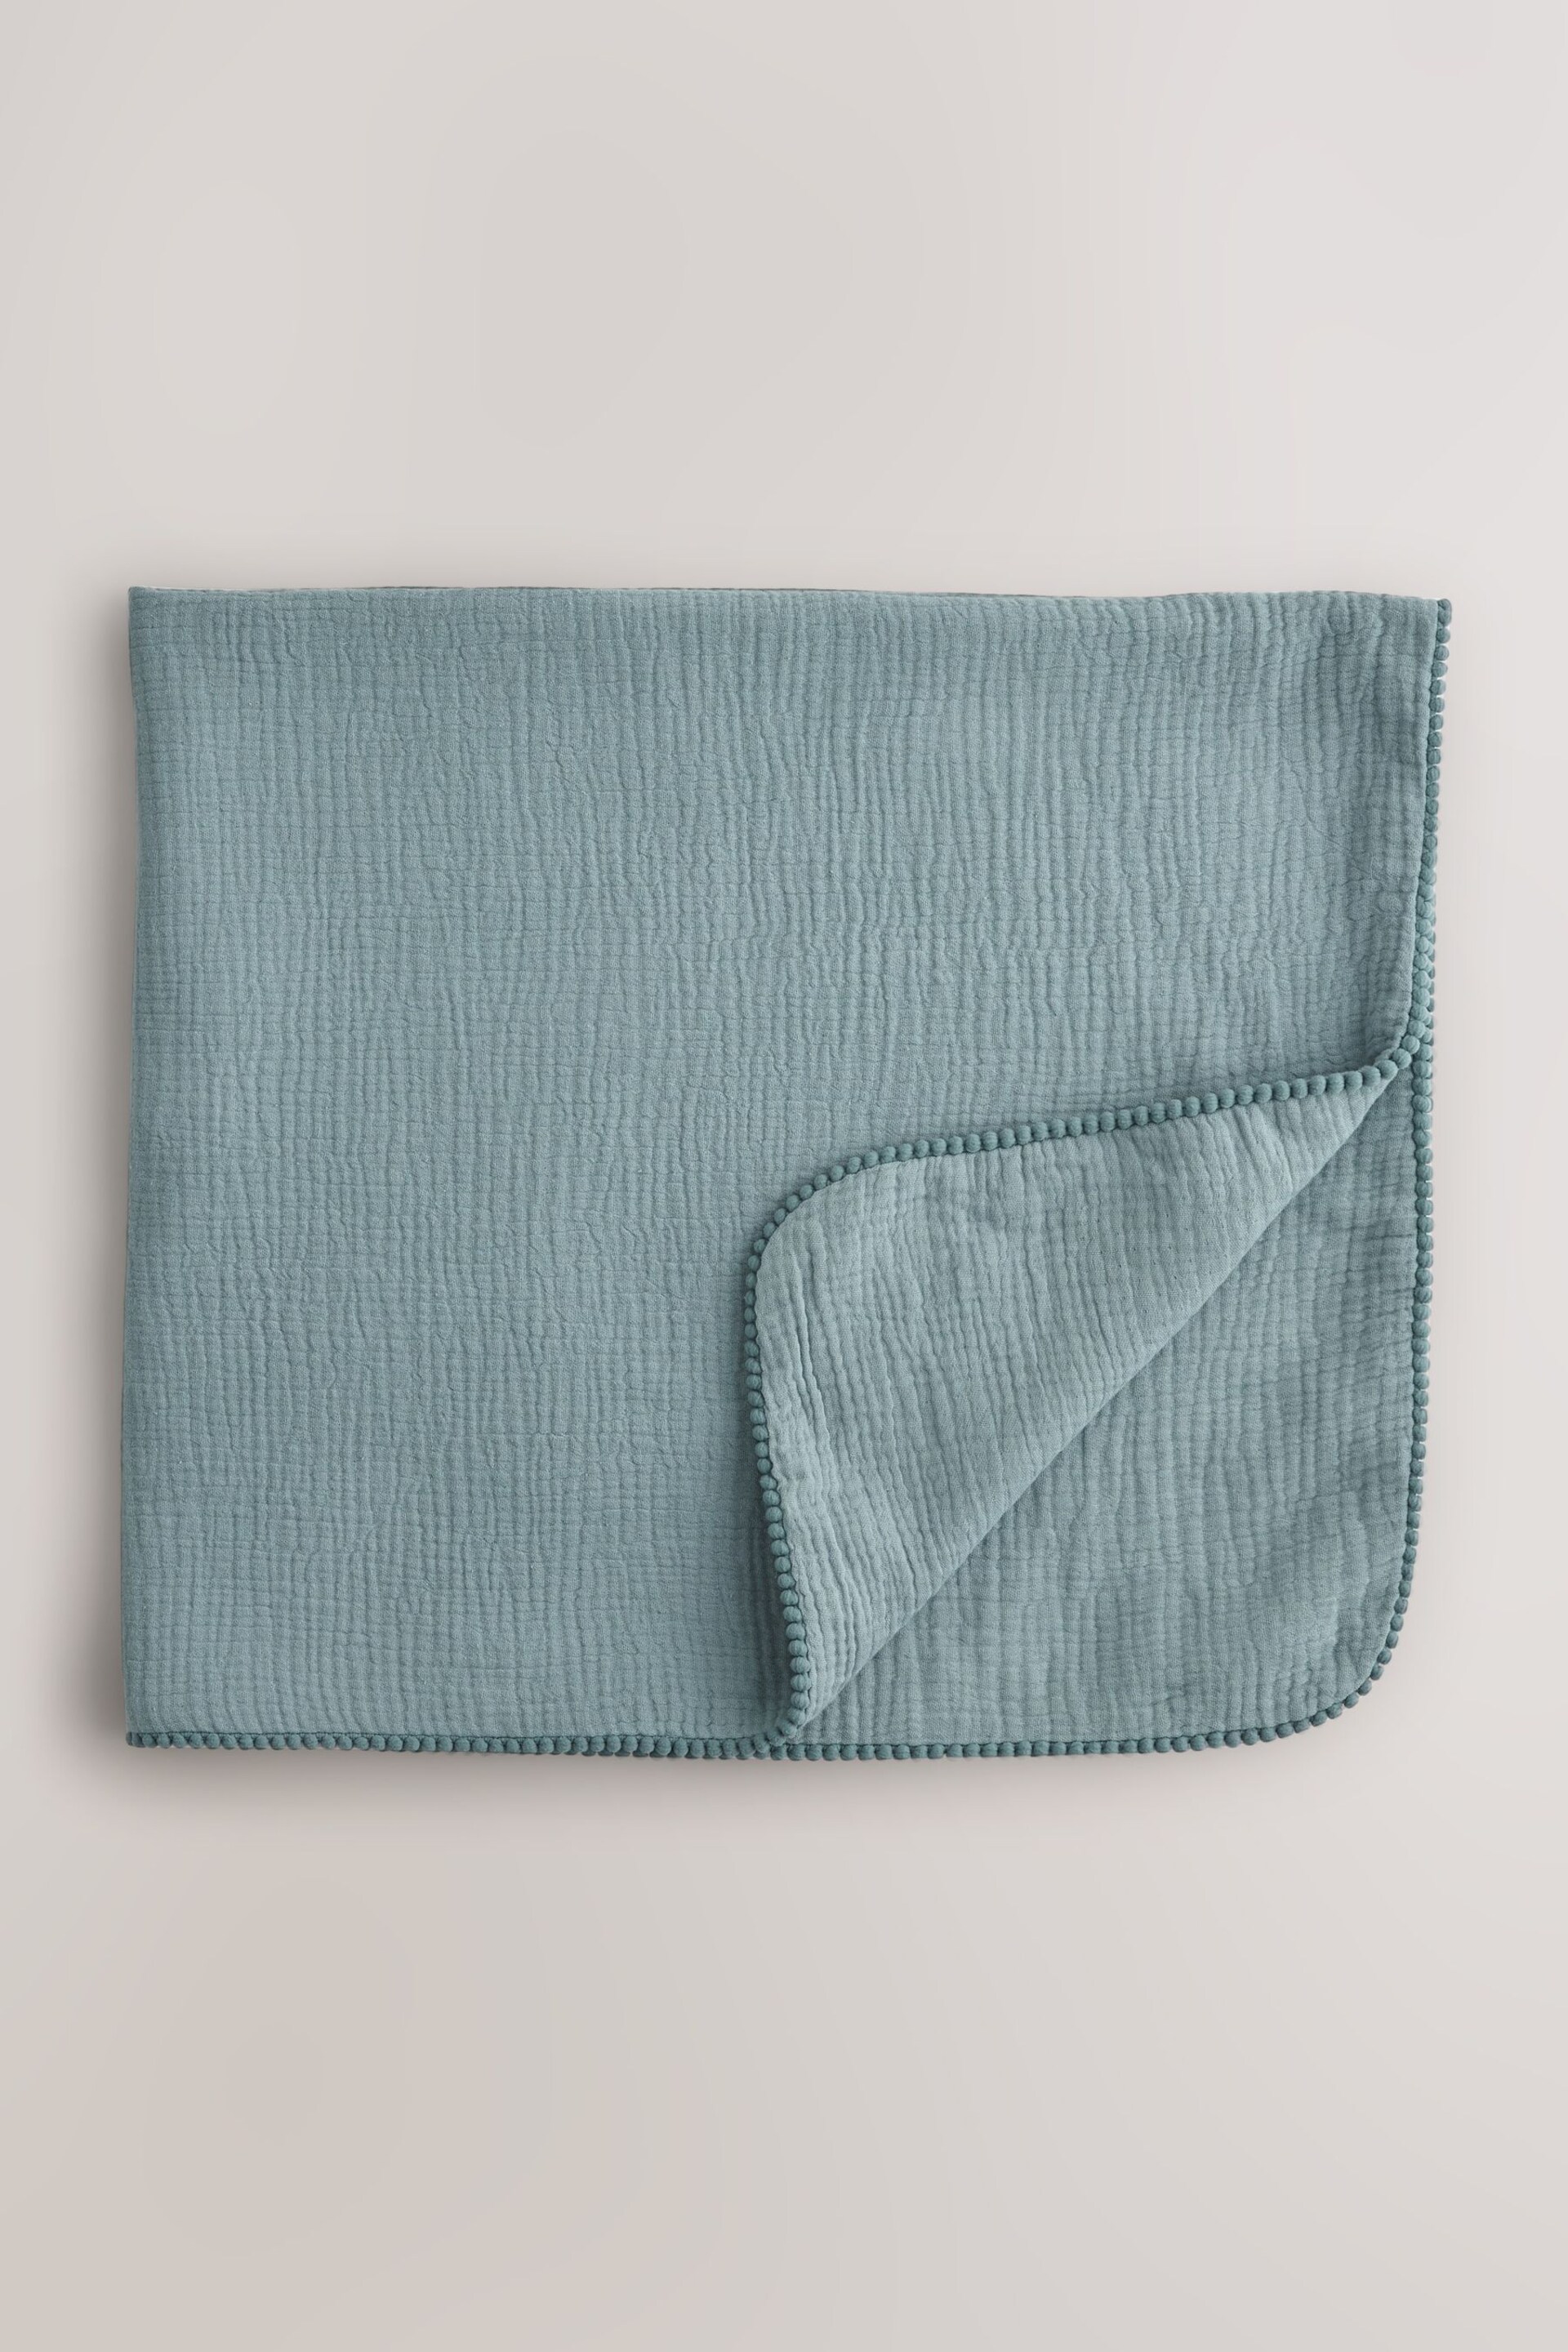 Blue Pom Baby 100% Cotton Muslin Blanket - Image 1 of 5